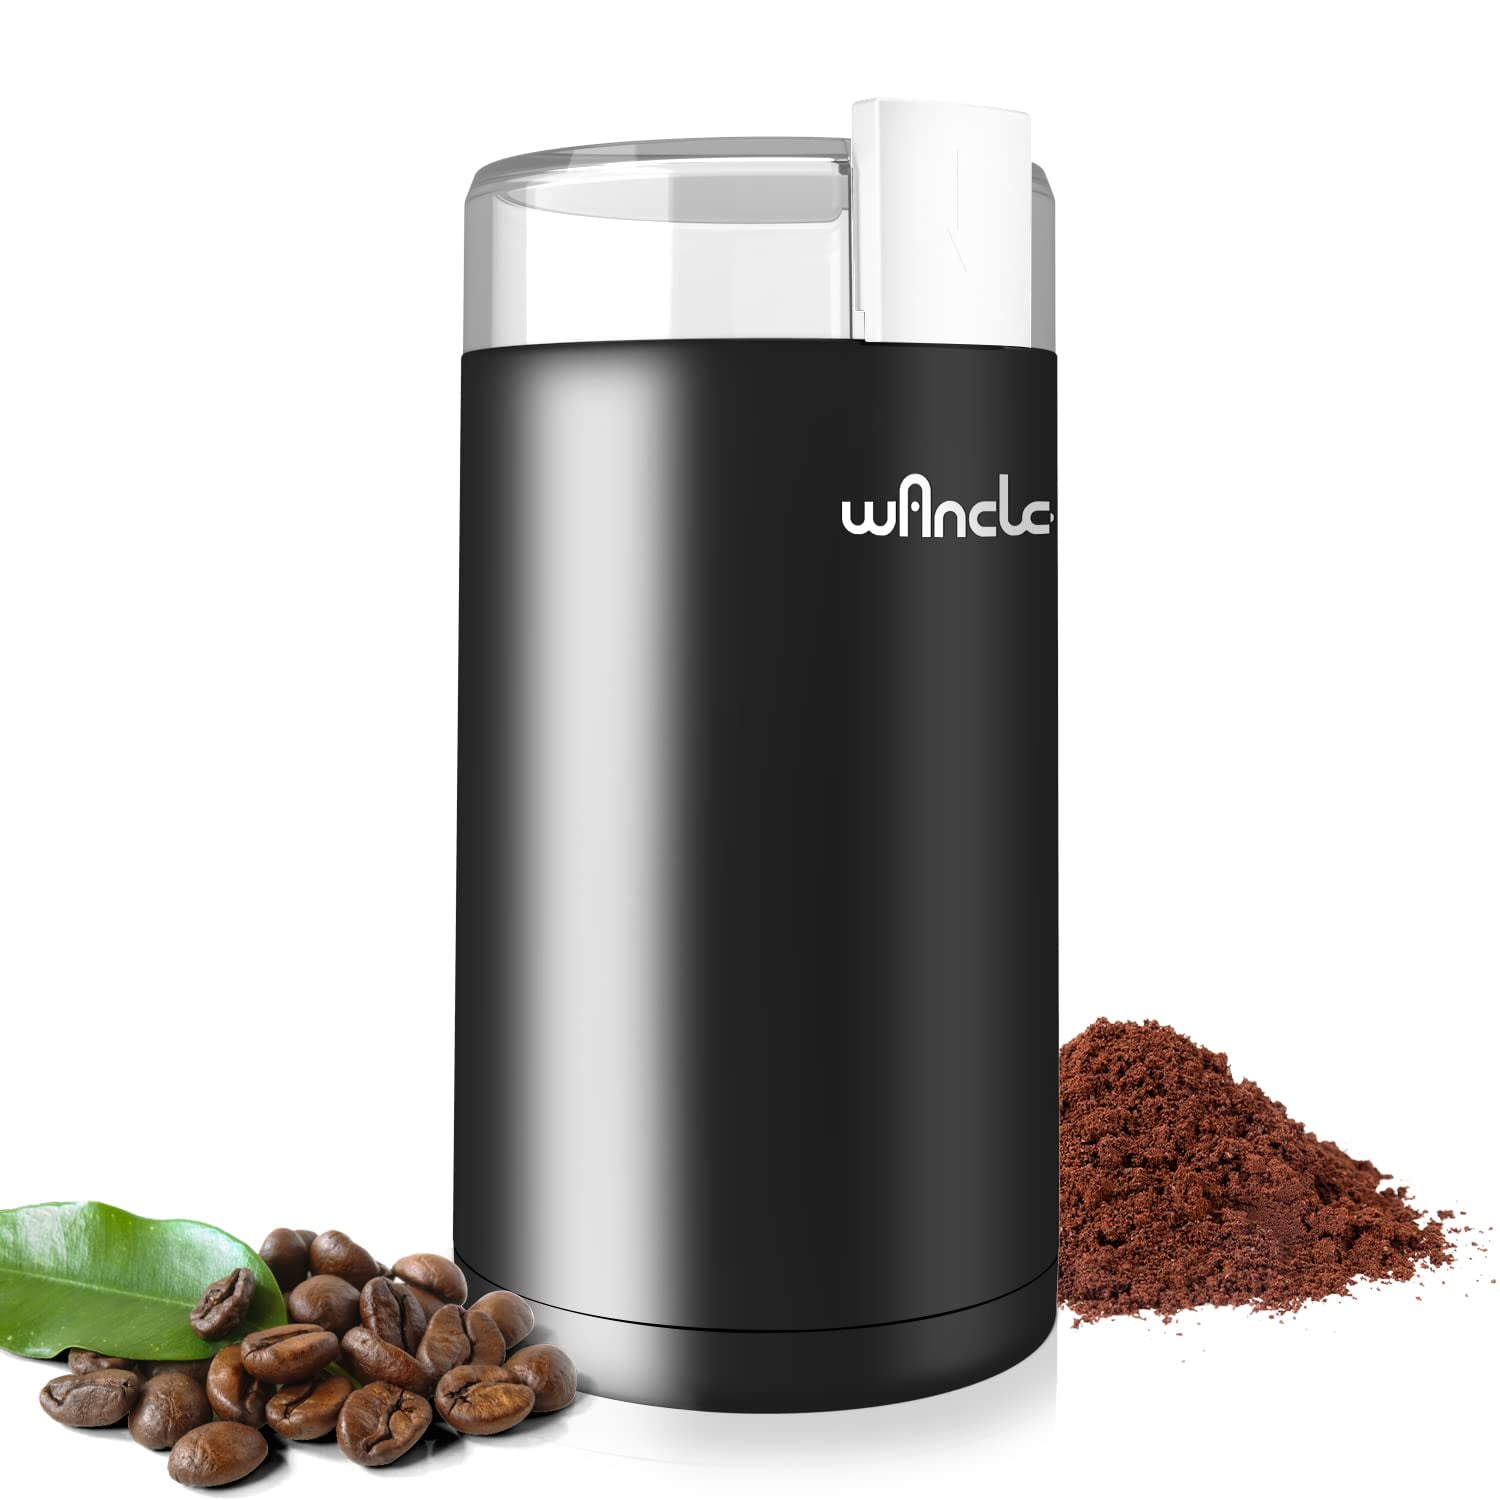  Aroma Housewares Mini Coffee Grinder and Electric Herb Grinder  with 304 Stainless Steel Grinding Blades and a See-through Lid (40 g.),  White, 40g: Home & Kitchen